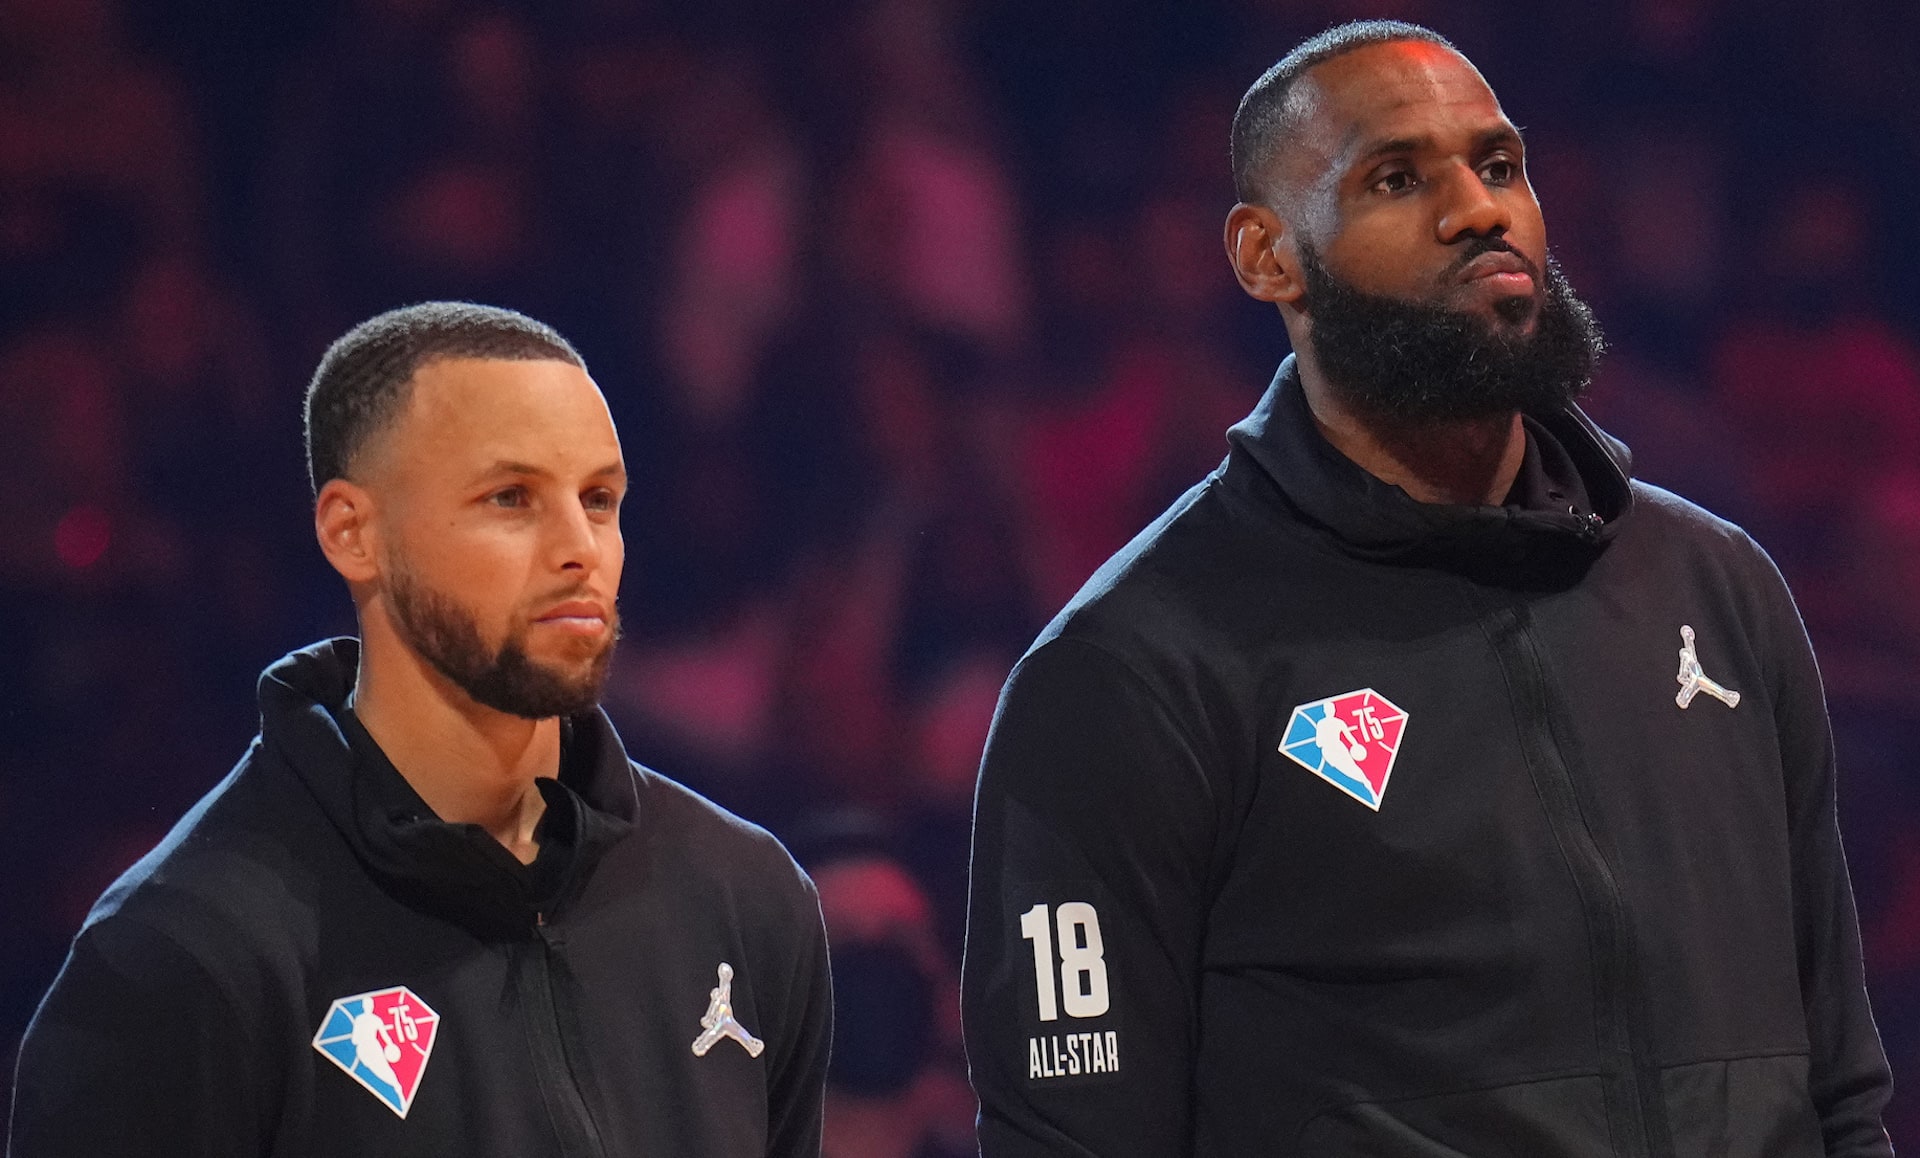 Steph Curry and LeBron James at 2022 All-Star Game